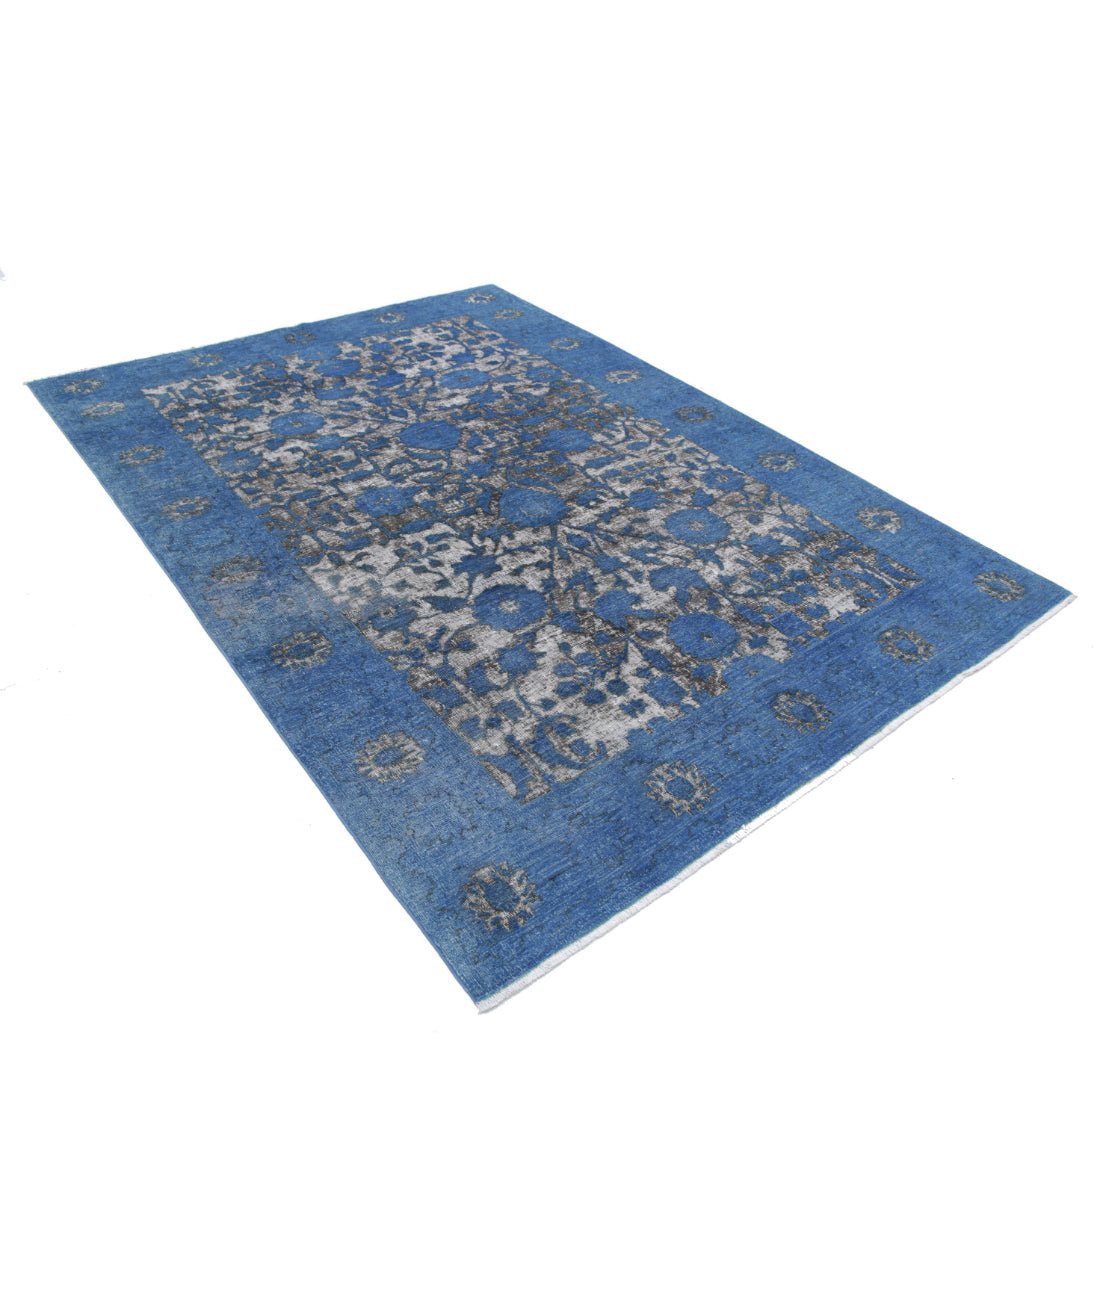 Hand Knotted Onyx Wool Rug - 6'2'' x 8'6'' 6'2'' x 8'6'' (185 X 255) / Blue / Blue